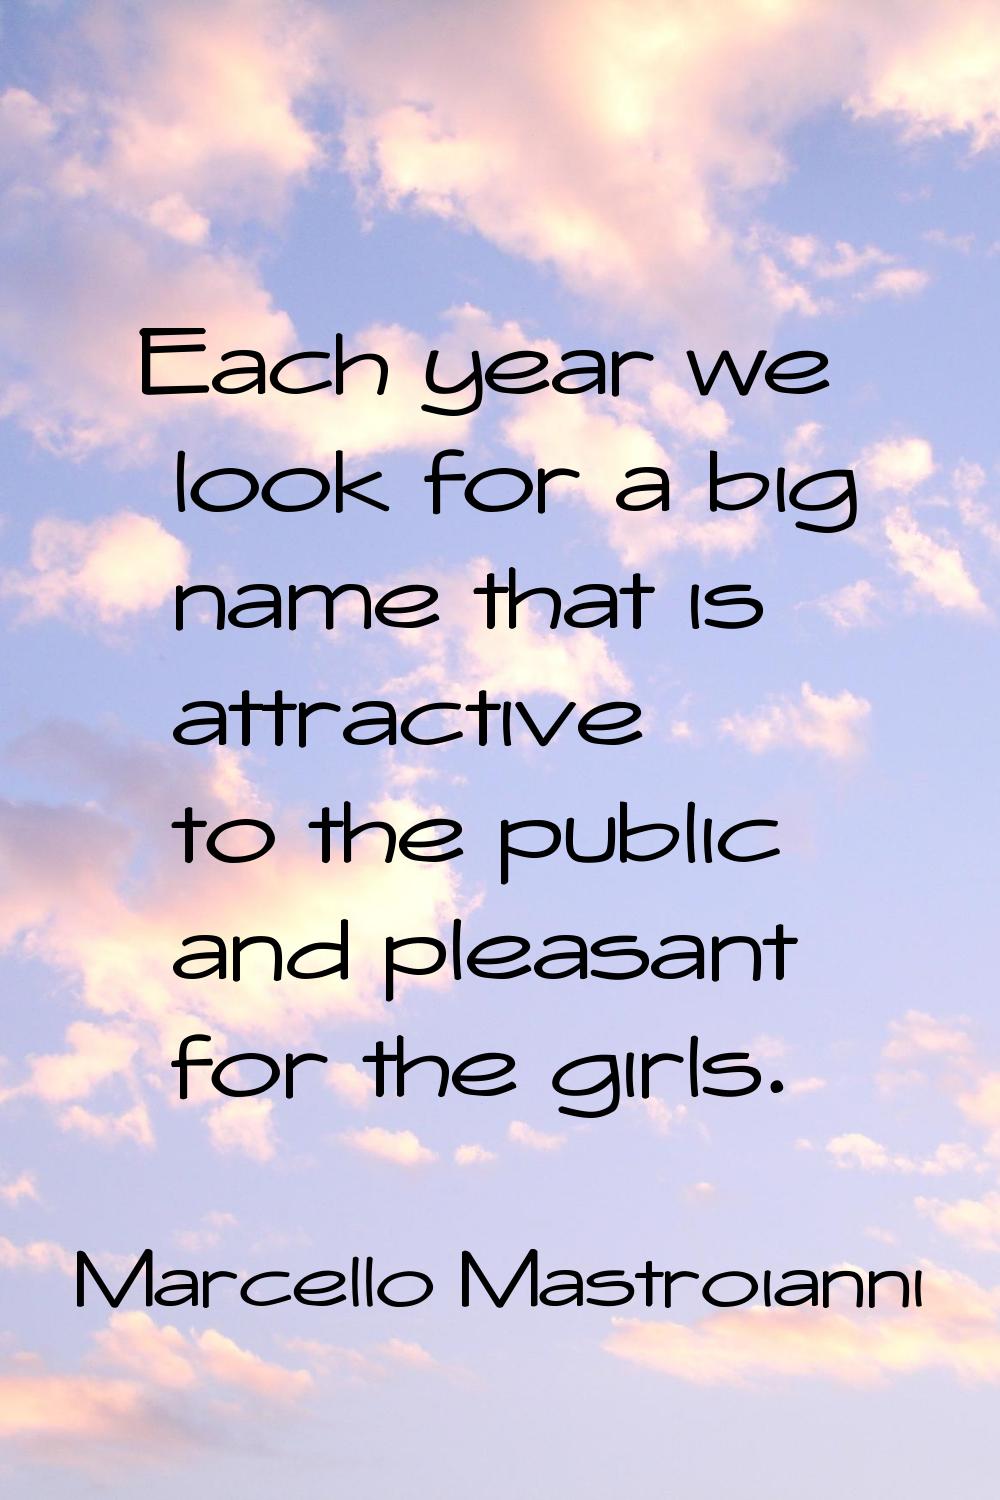 Each year we look for a big name that is attractive to the public and pleasant for the girls.